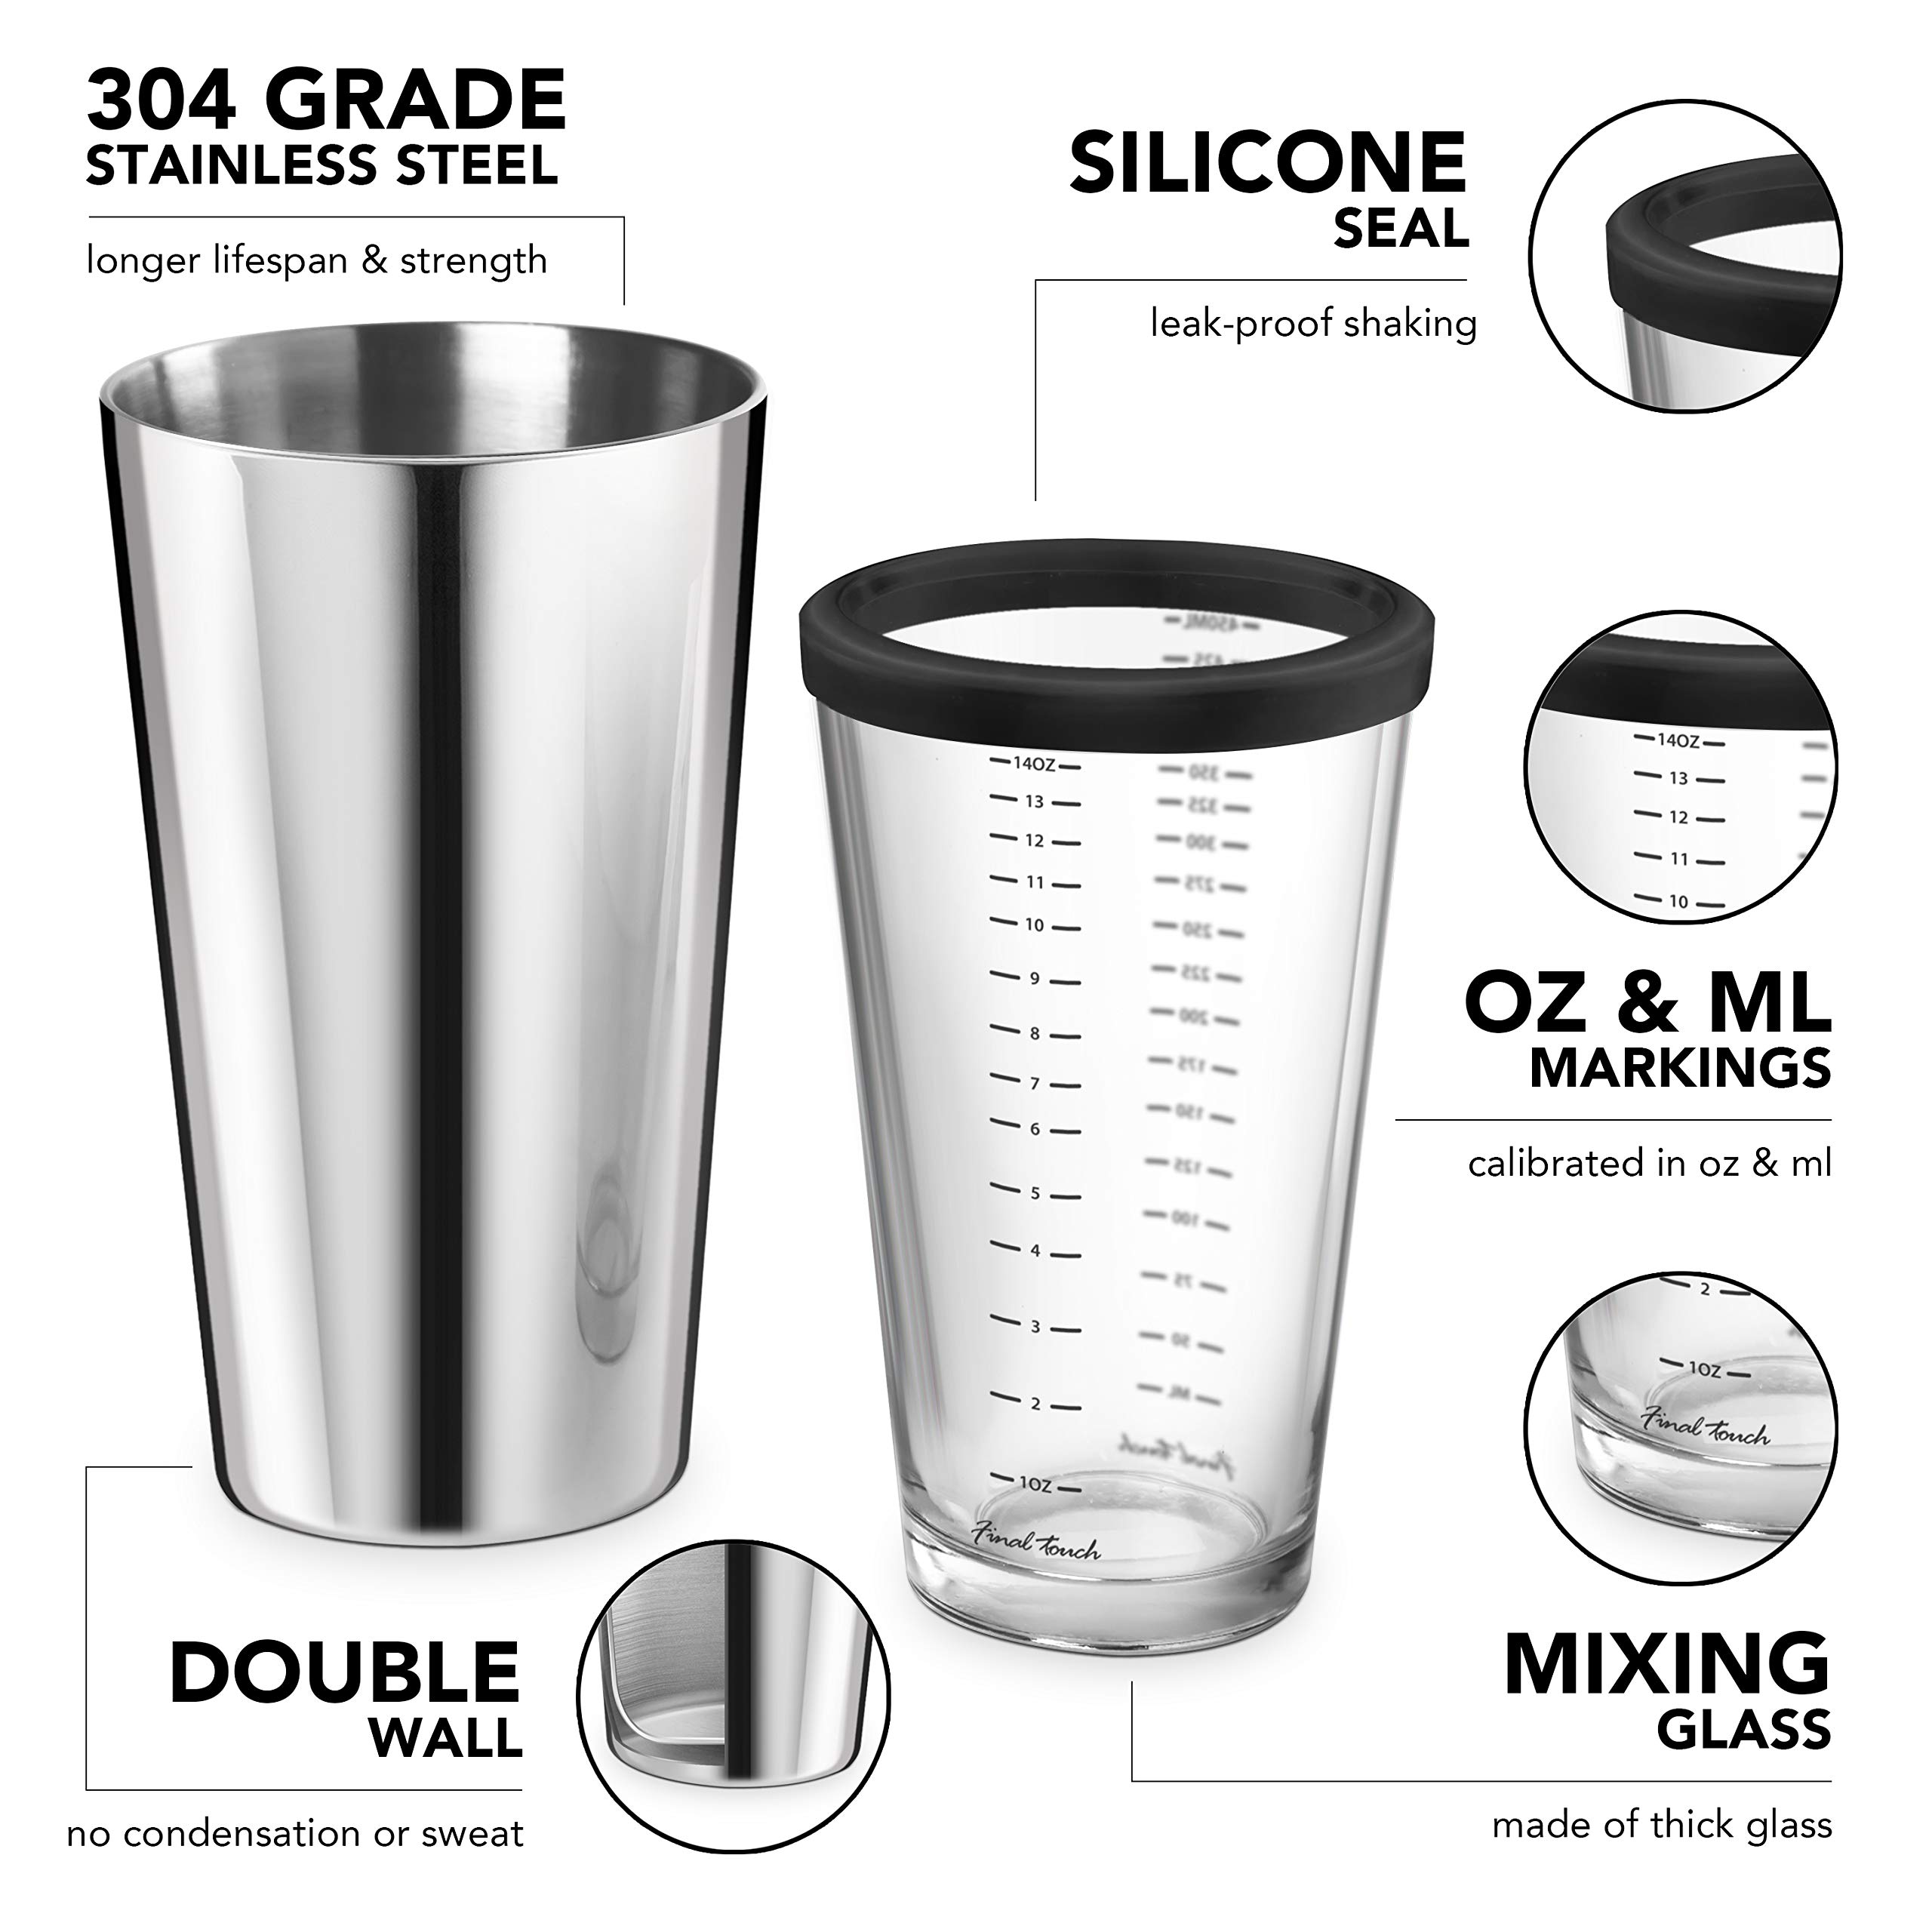 Final Touch Double Wall Boston Shaker with Silicone Seal and Ounce/Milliliter Measurements (FTA1852)